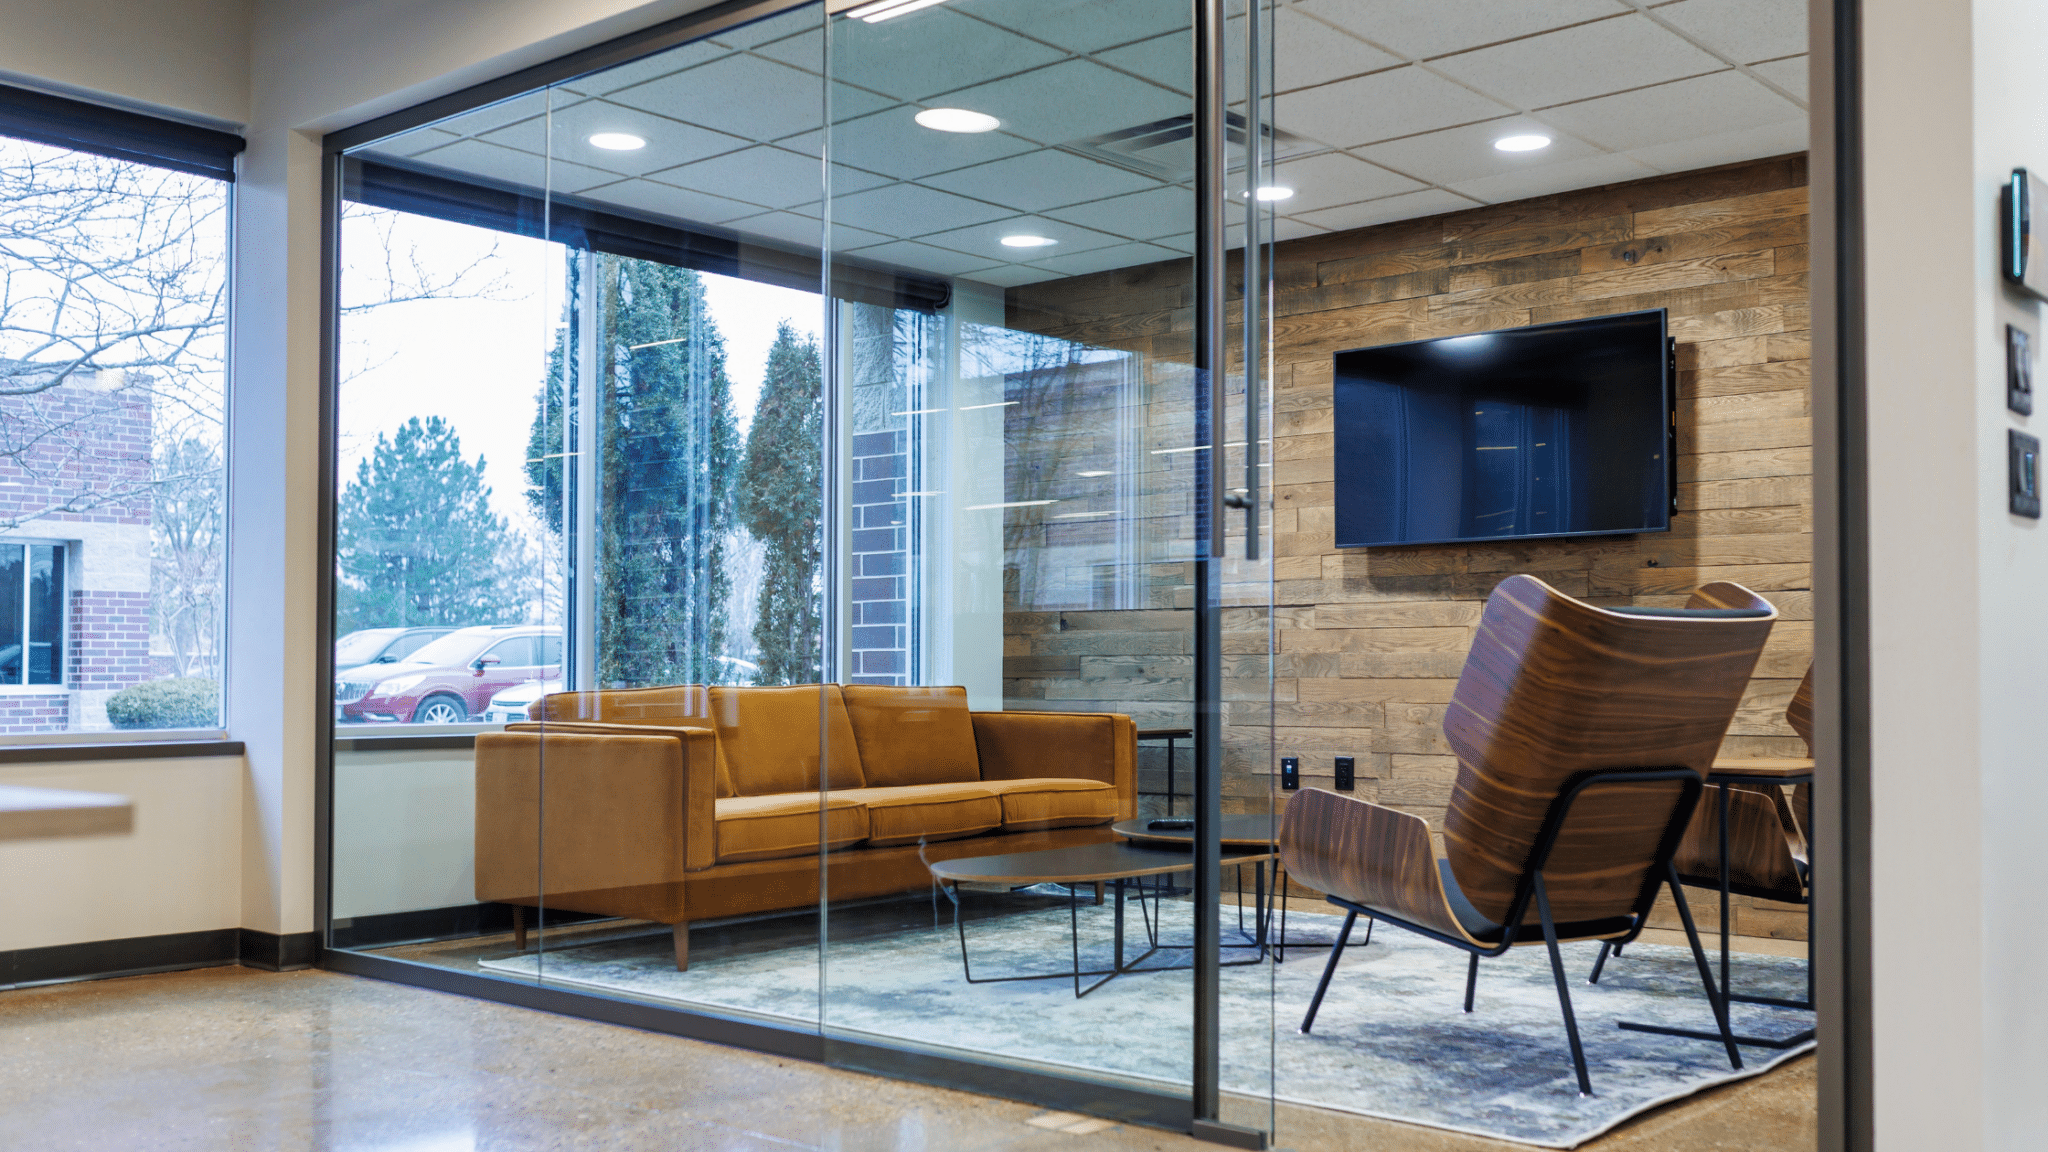 Glass Tknion architectural walls compliment a modern office space that contains leather couch and chairs.